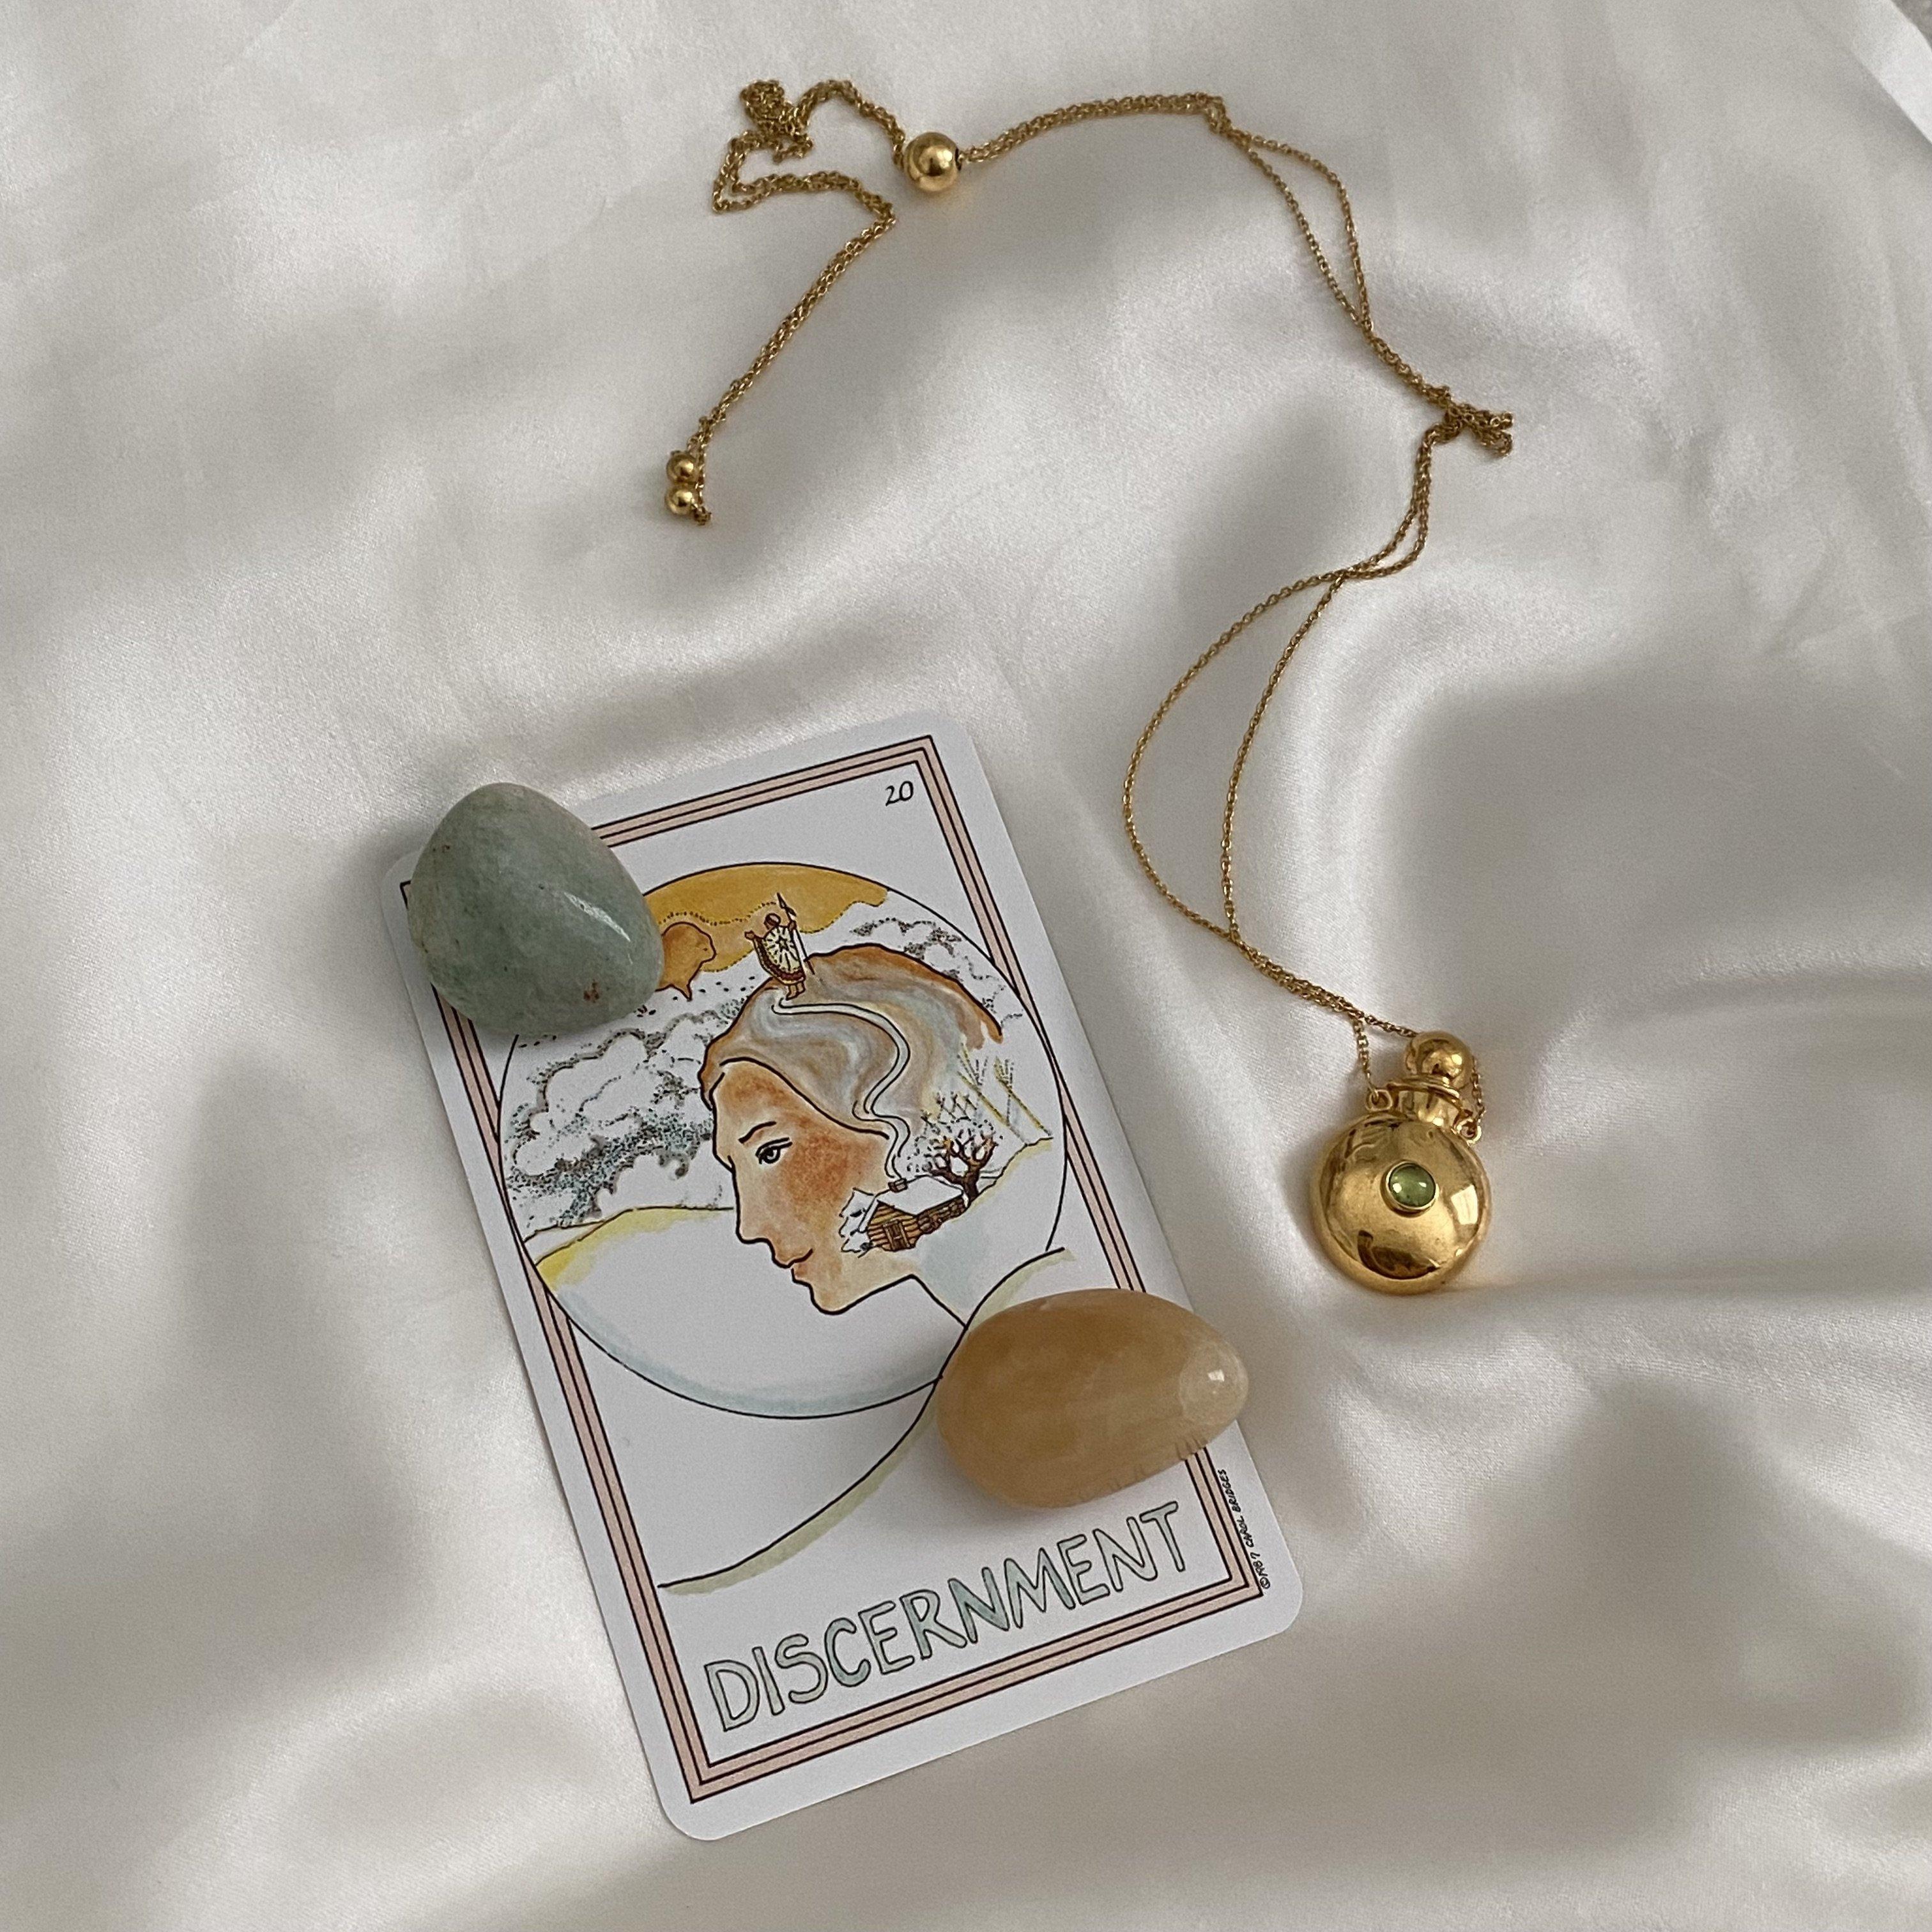 The classic rounded style outside is on the front and back, accented with a round semiprecious cabochon stone. Its hollow inside can bring your favorite perfume or essential oil wherever you go. 

Metals: 18K Gold vermeil with moss peridot or